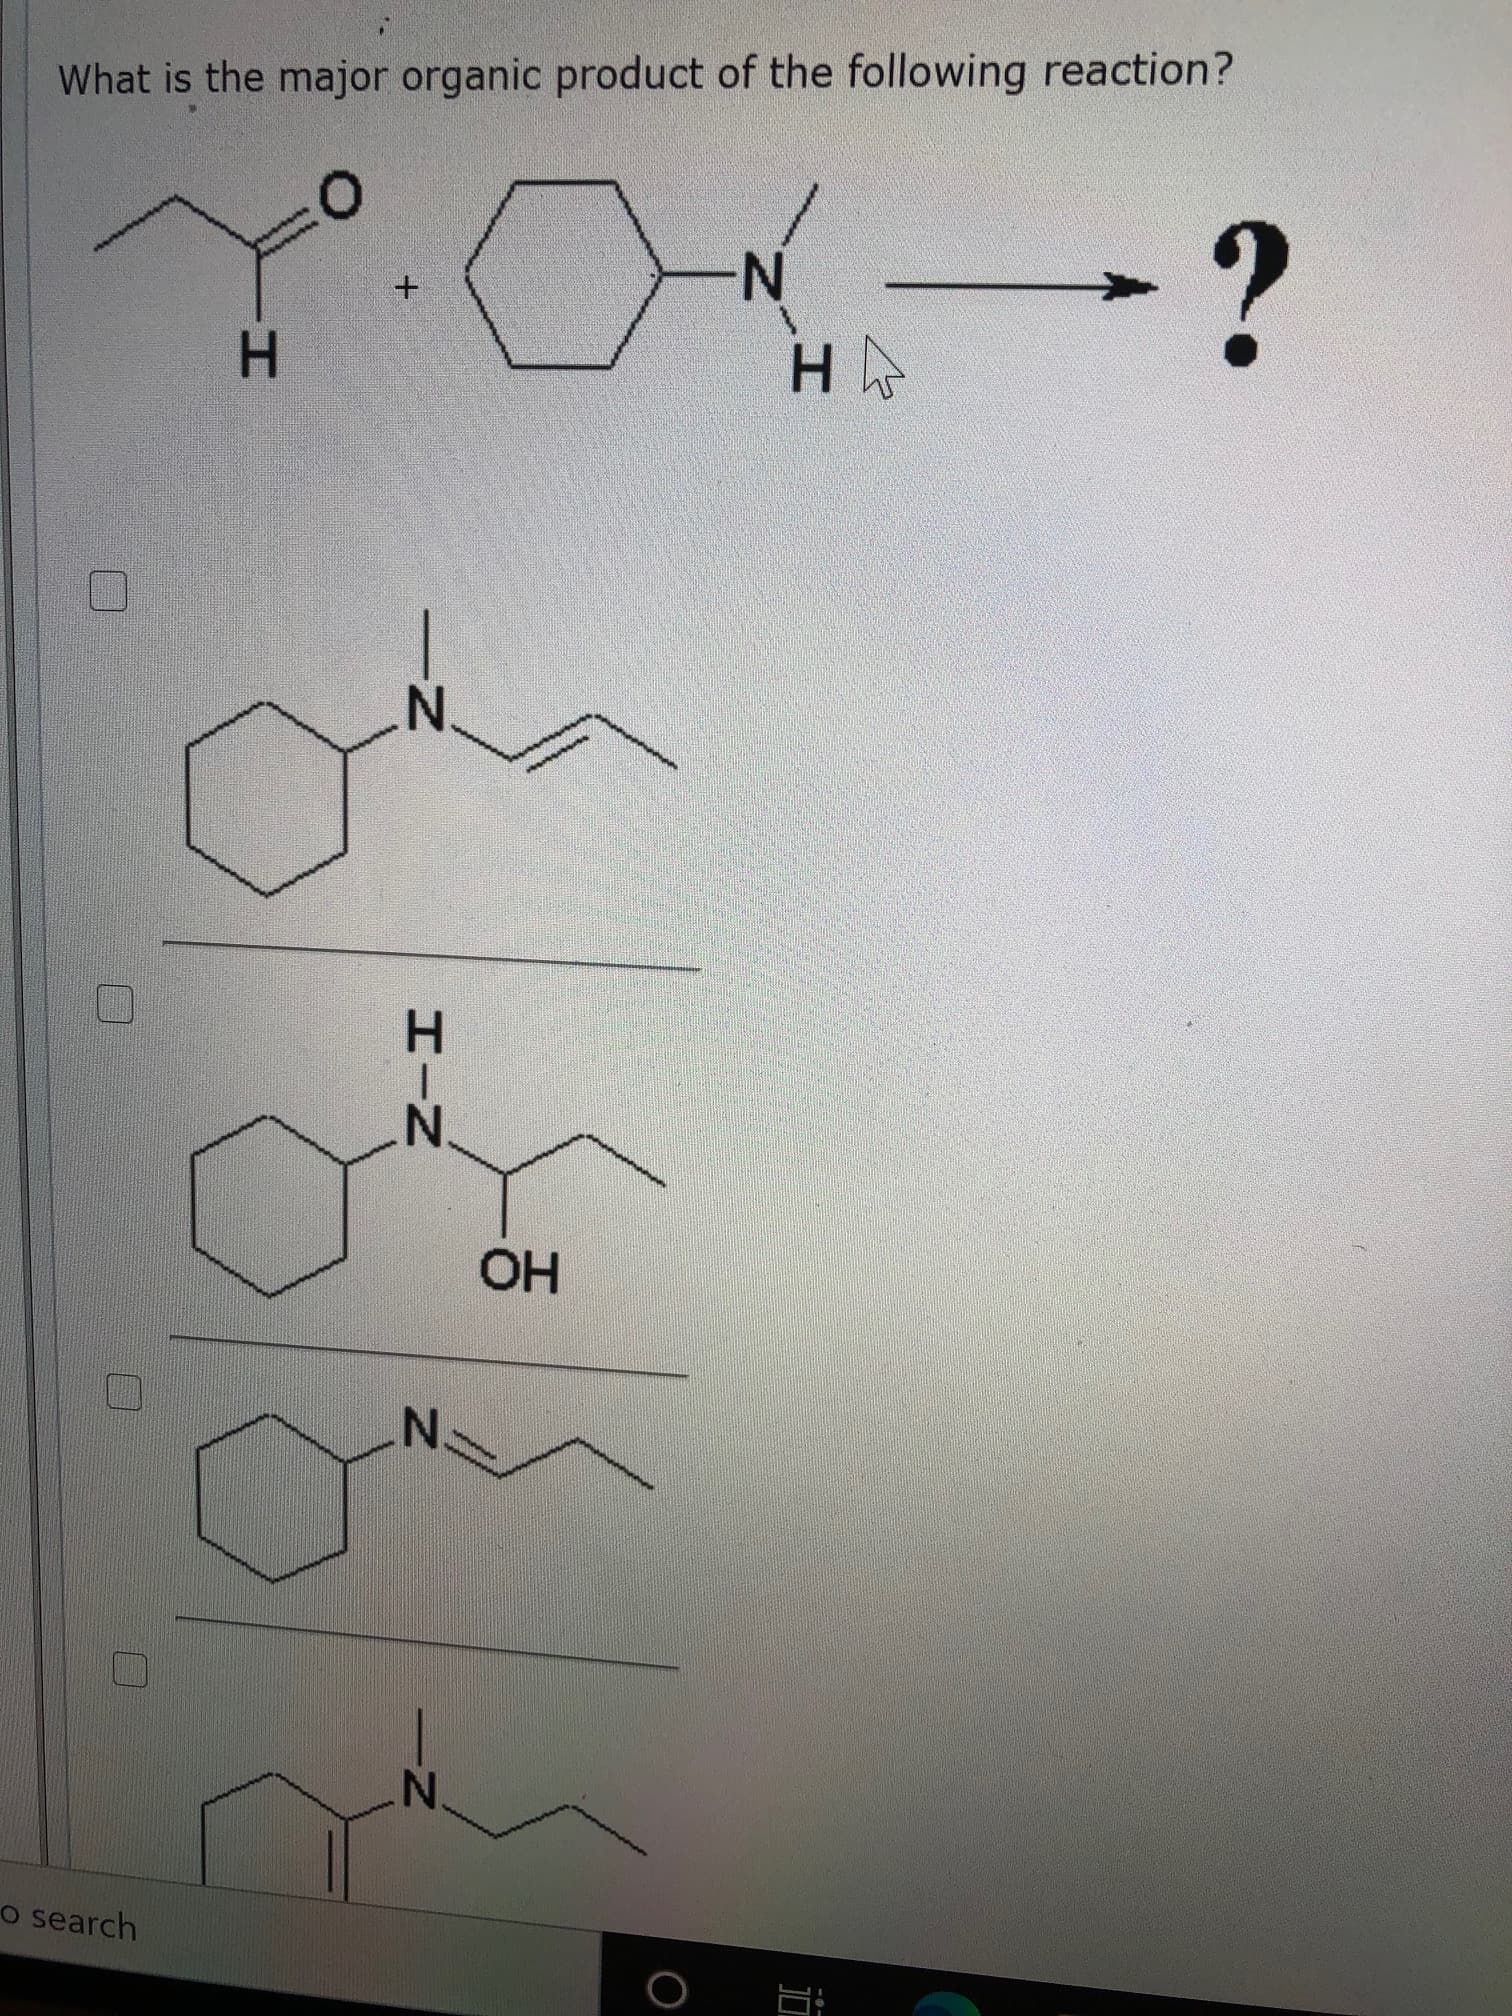 What is the major organic product of the following reaction?
N'
H.
